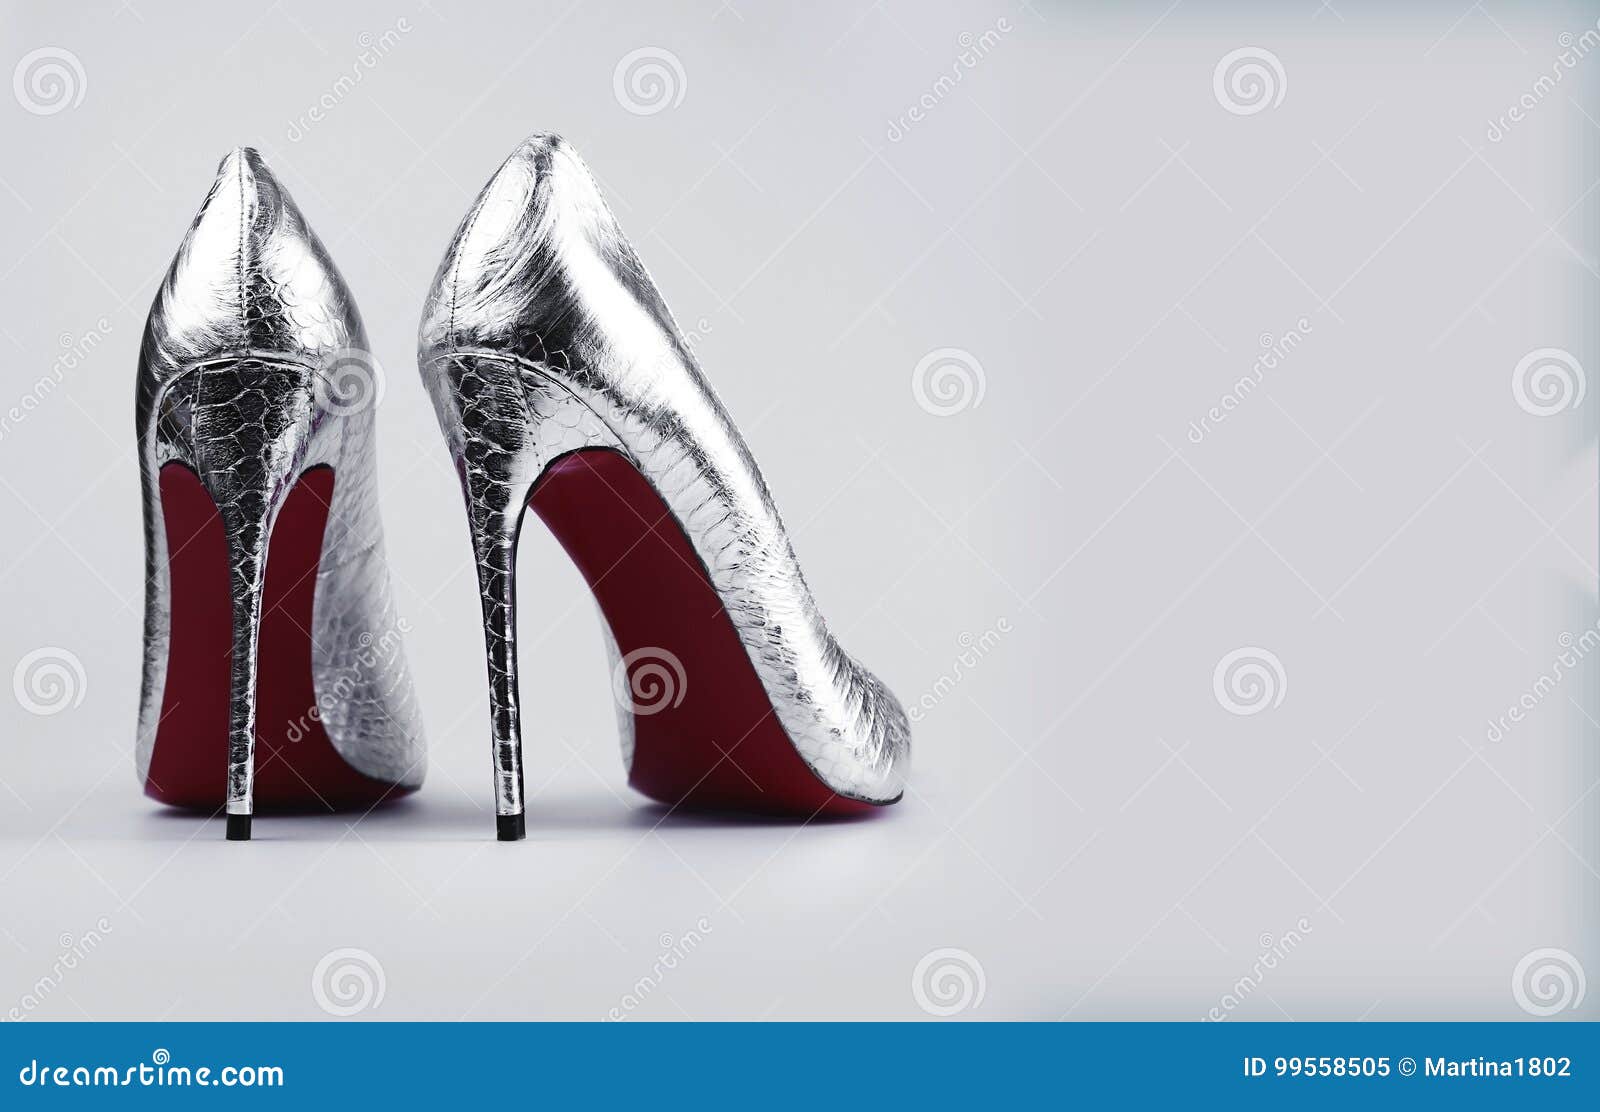 47,446 Silver Shoes Images, Stock Photos, 3D objects, & Vectors